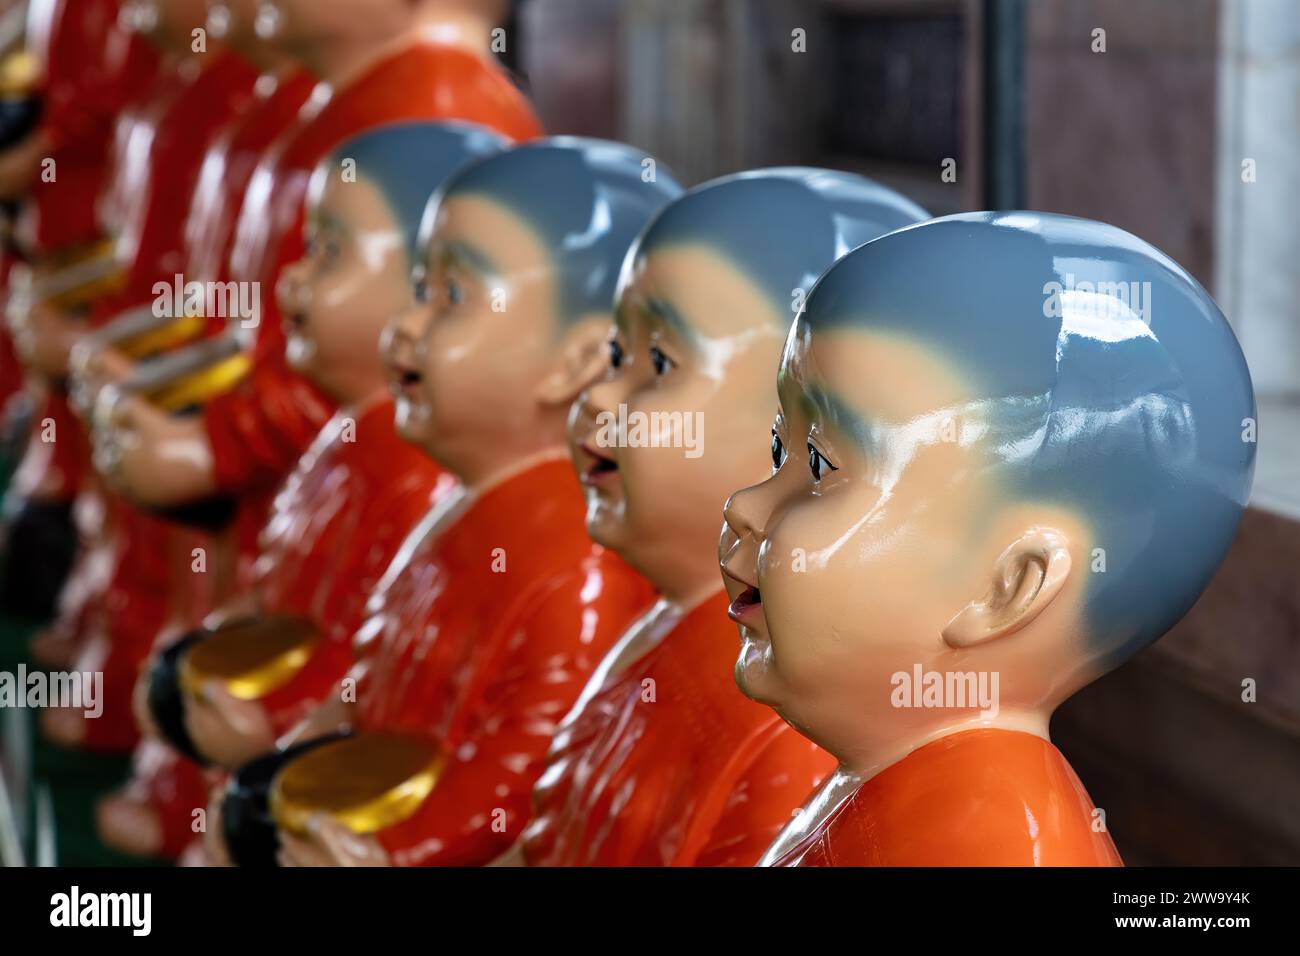 Line of statues depicting monks at Wat Rakhang (Temple of the Bells) in Bangkok, Thailand. Wearing red robes, holding golden bowls, shaved heads. Stock Photo